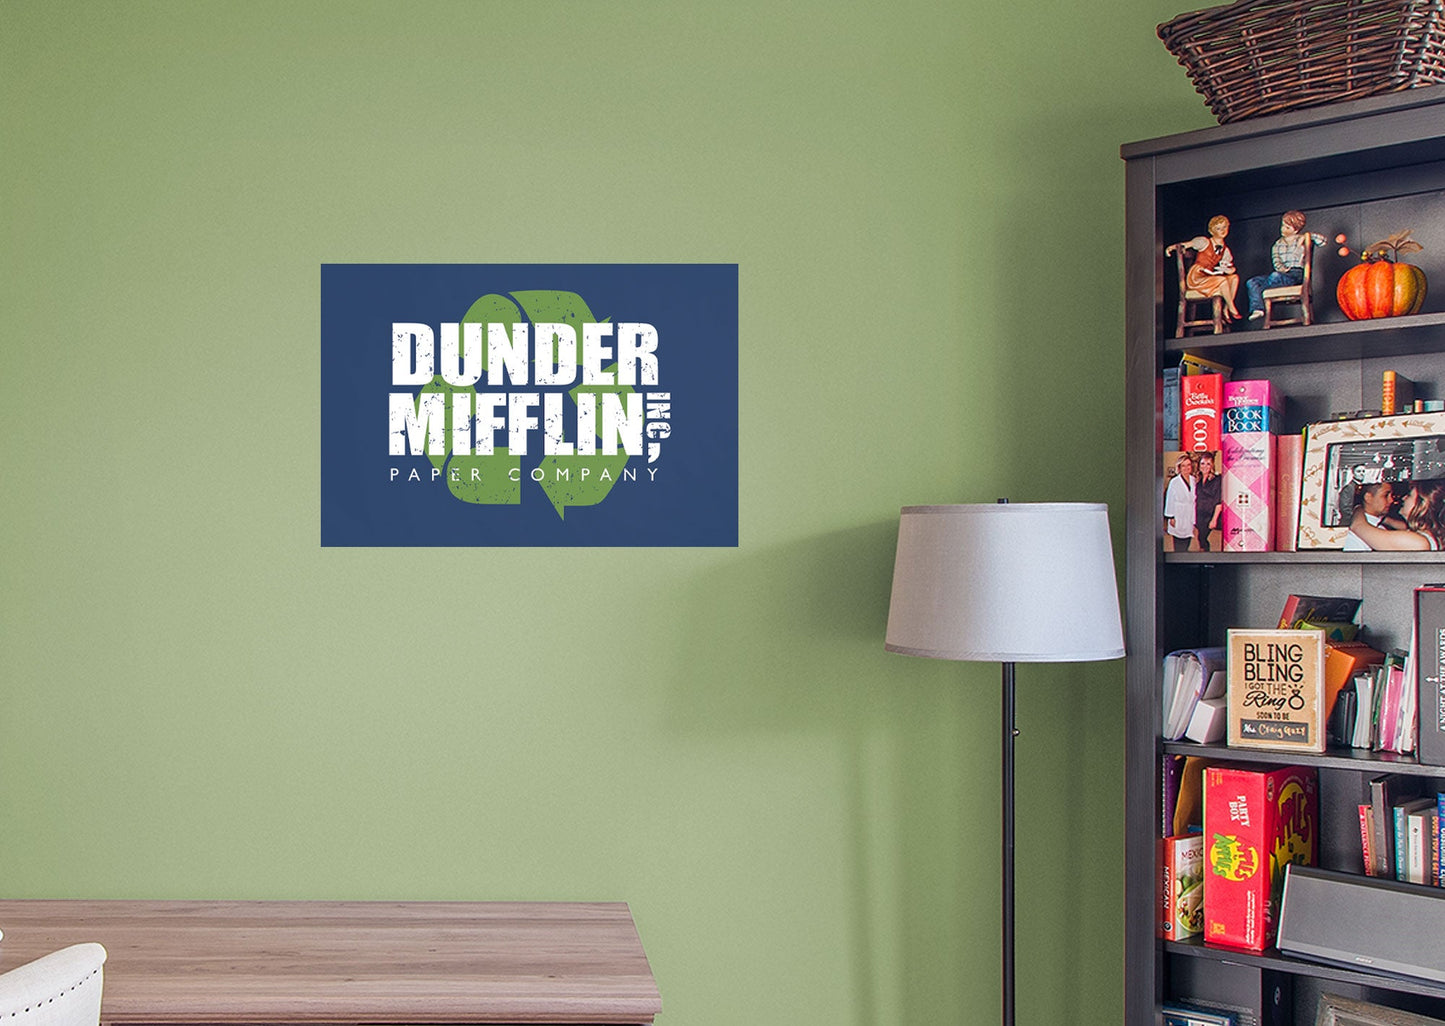 The Office: Dunder Mifflin Logo Mural        - Officially Licensed NBC Universal Removable Wall   Adhesive Decal